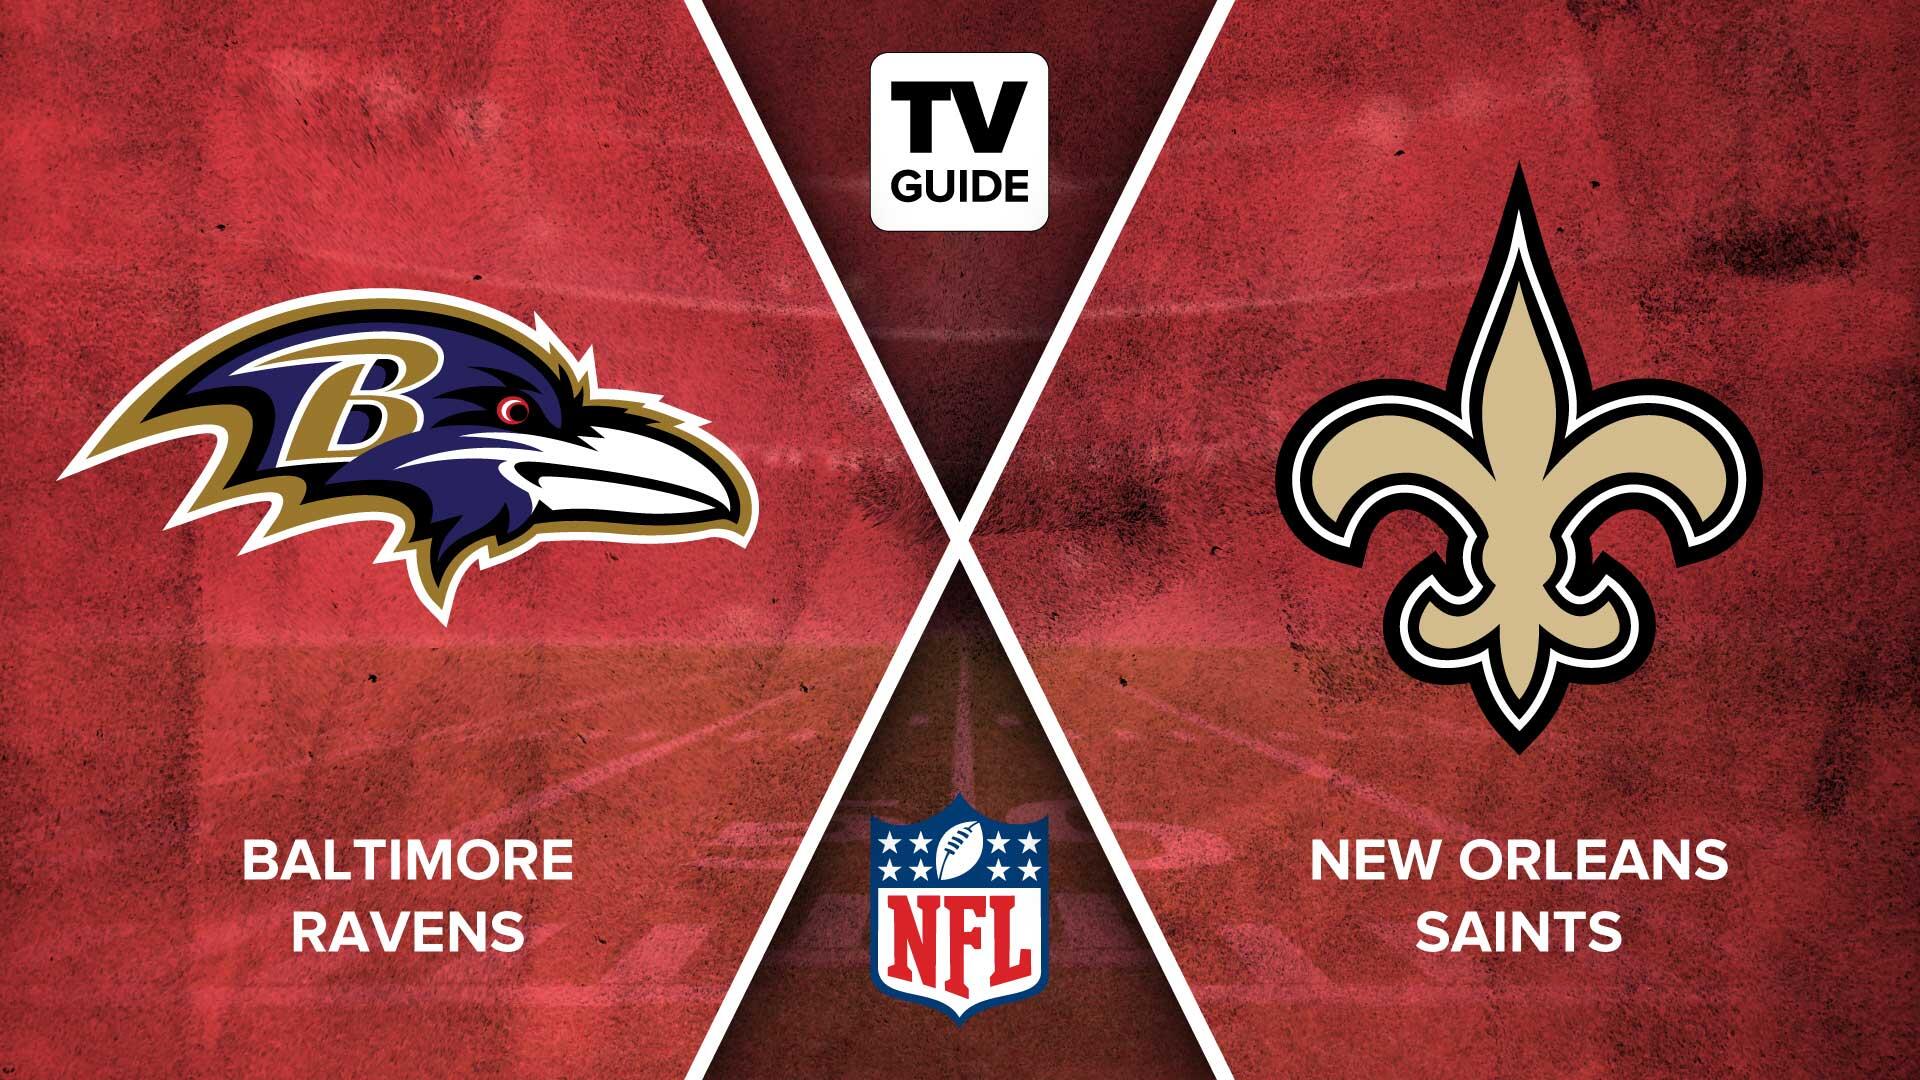 How to Watch MNF Ravens vs. Saints Live on 11/07 - TV Guide